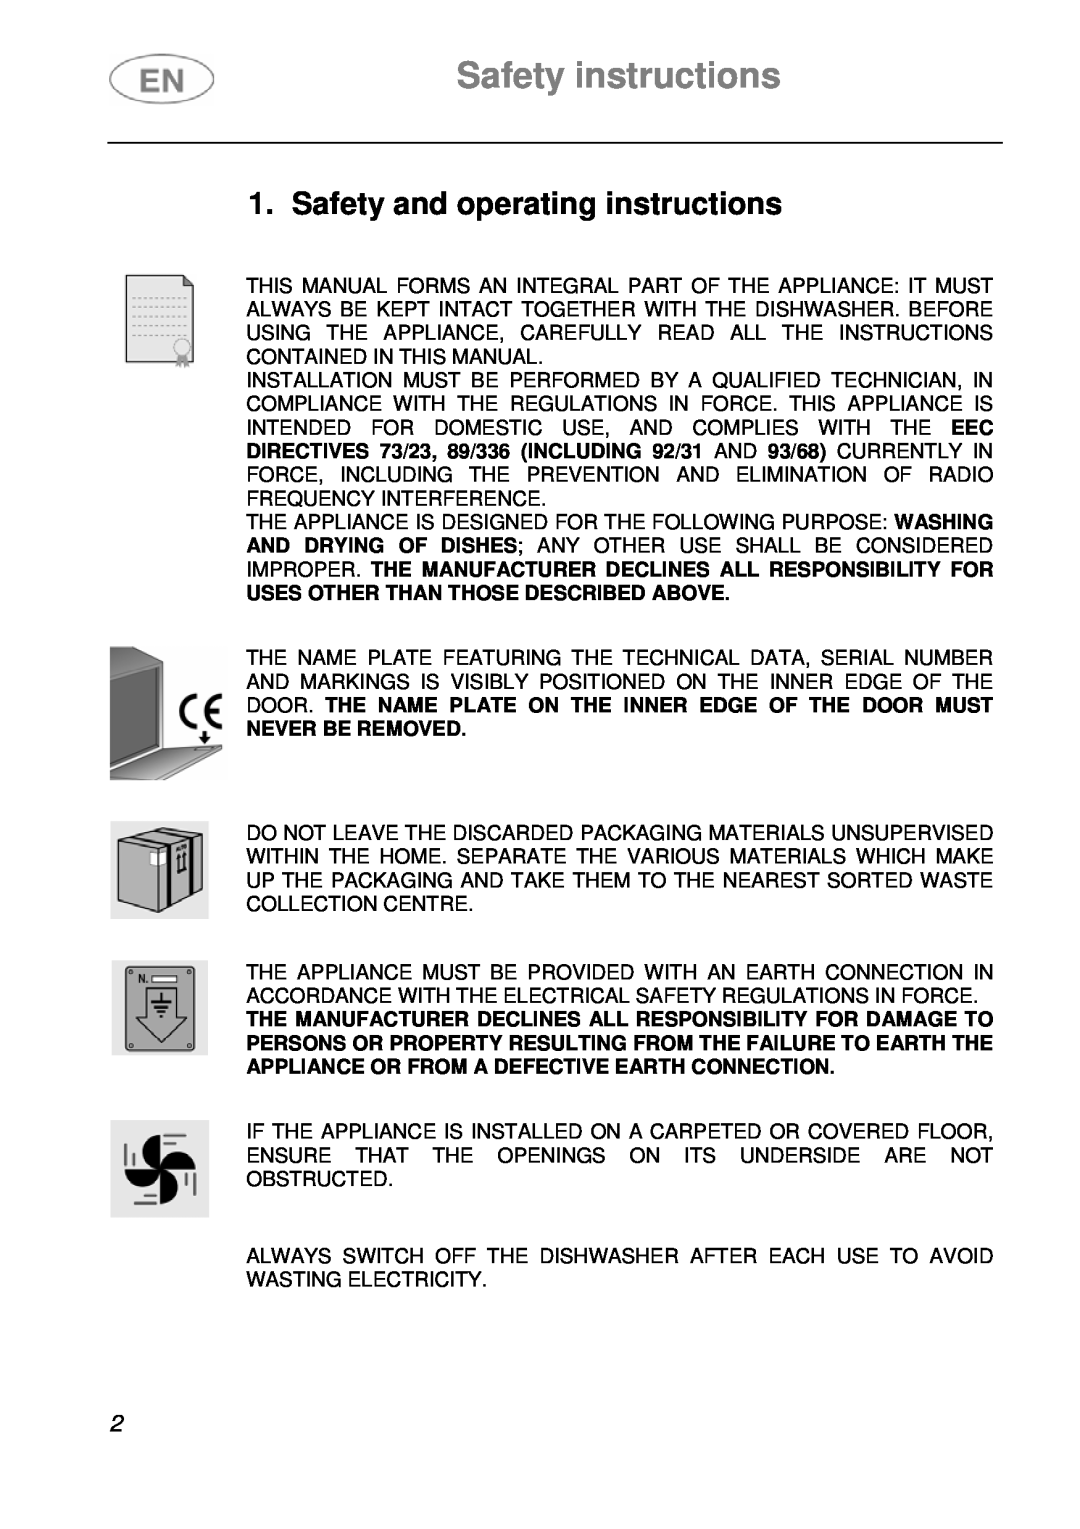 Smeg EN Safety instructions, Safety and operating instructions, Uses Other Than Those Described Above, Never Be Removed 